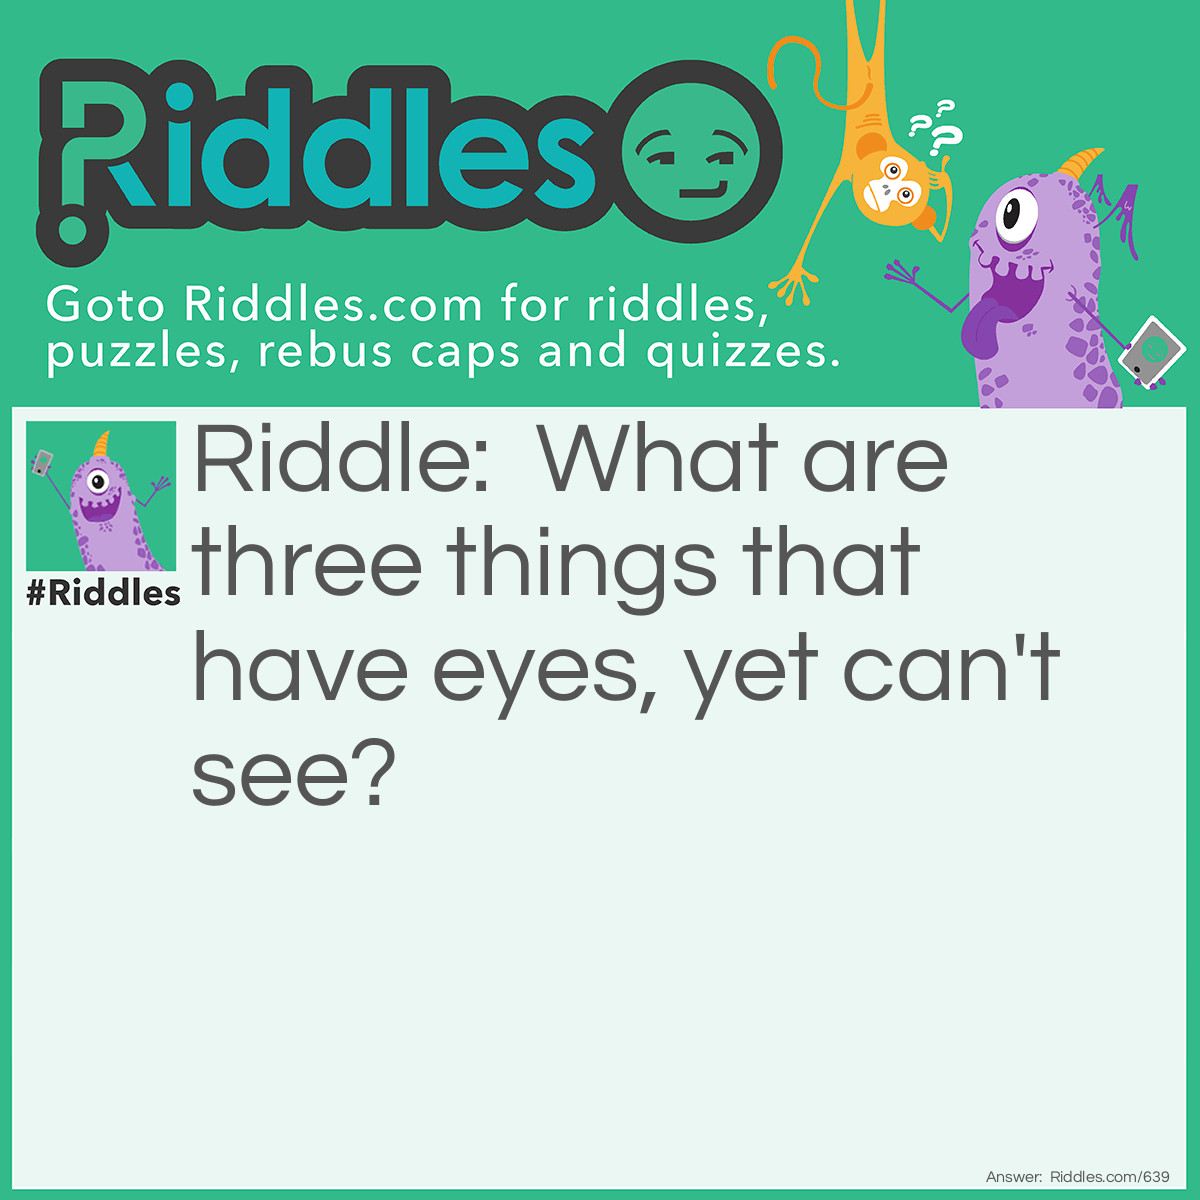 Riddle: What are three things that have eyes, yet can't see? Answer: Needle, storm and  potato.